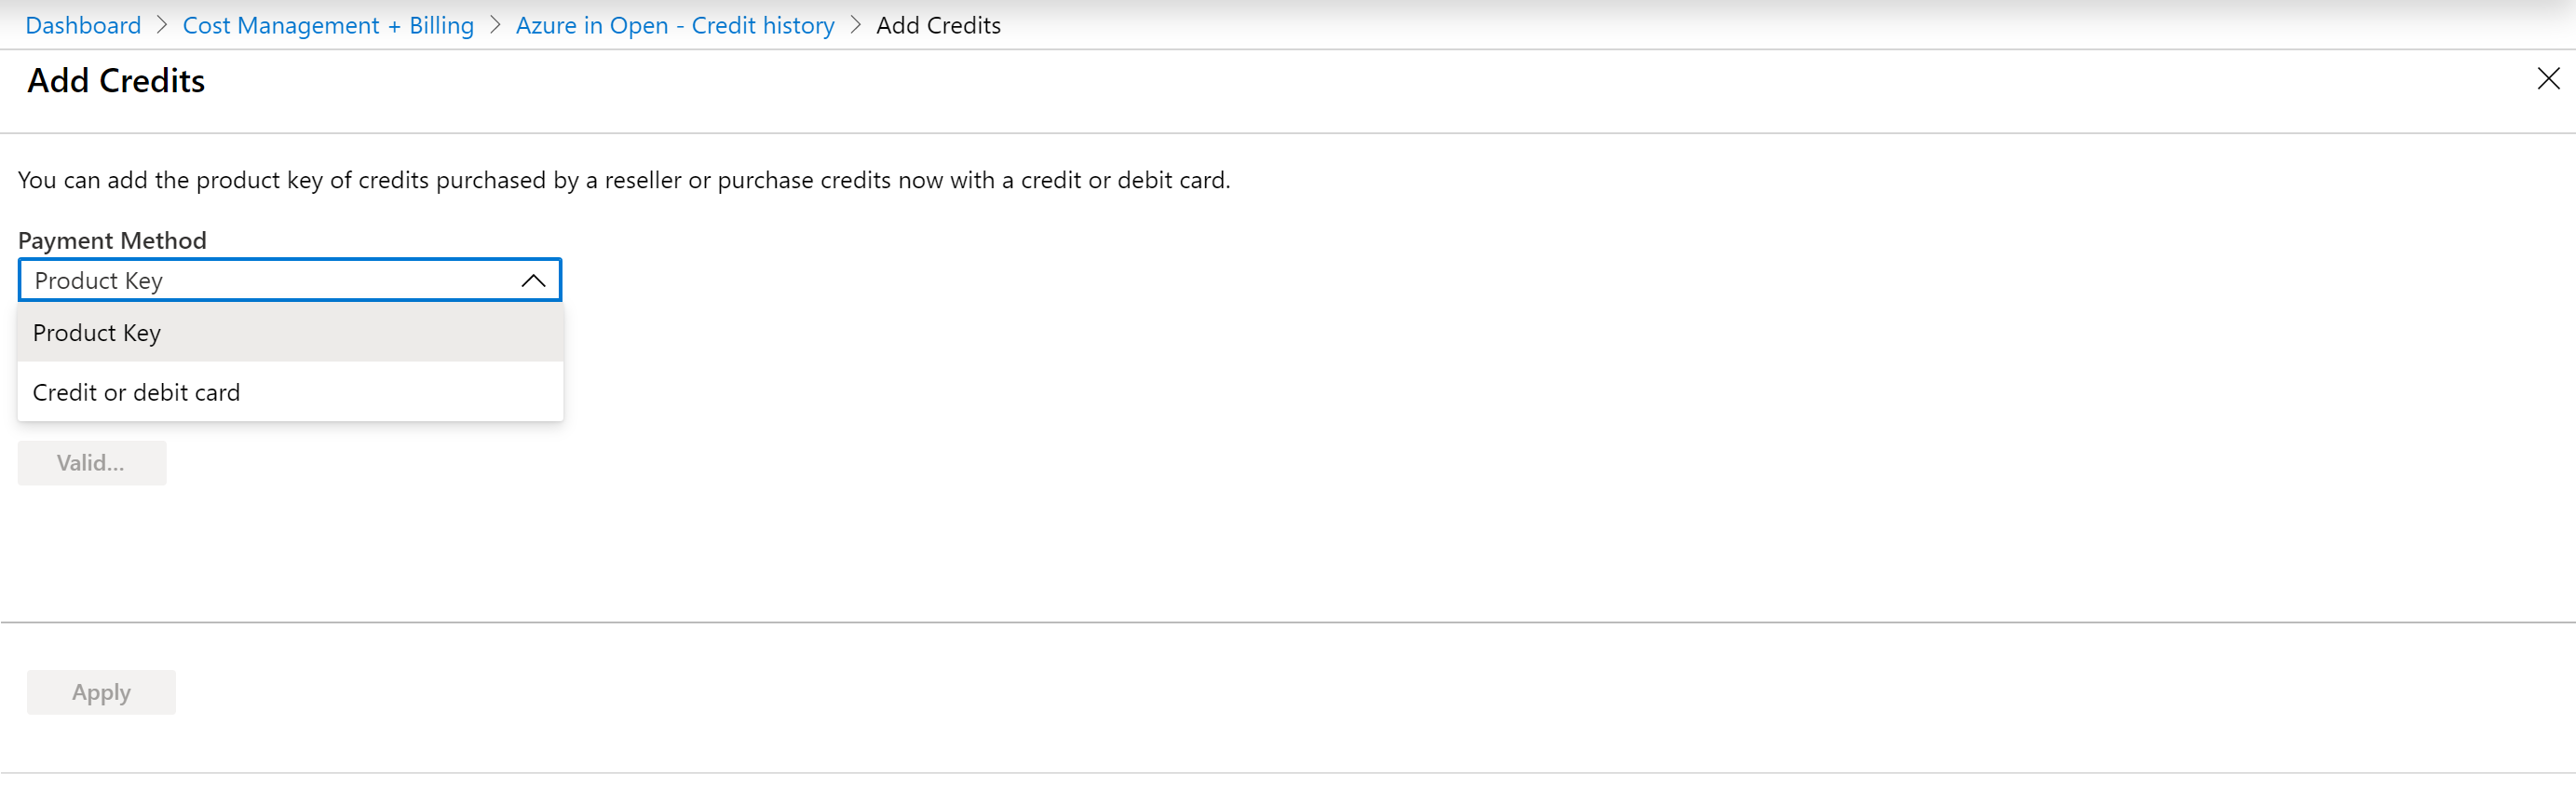 Screenshot that payment method drop down in add credits blade